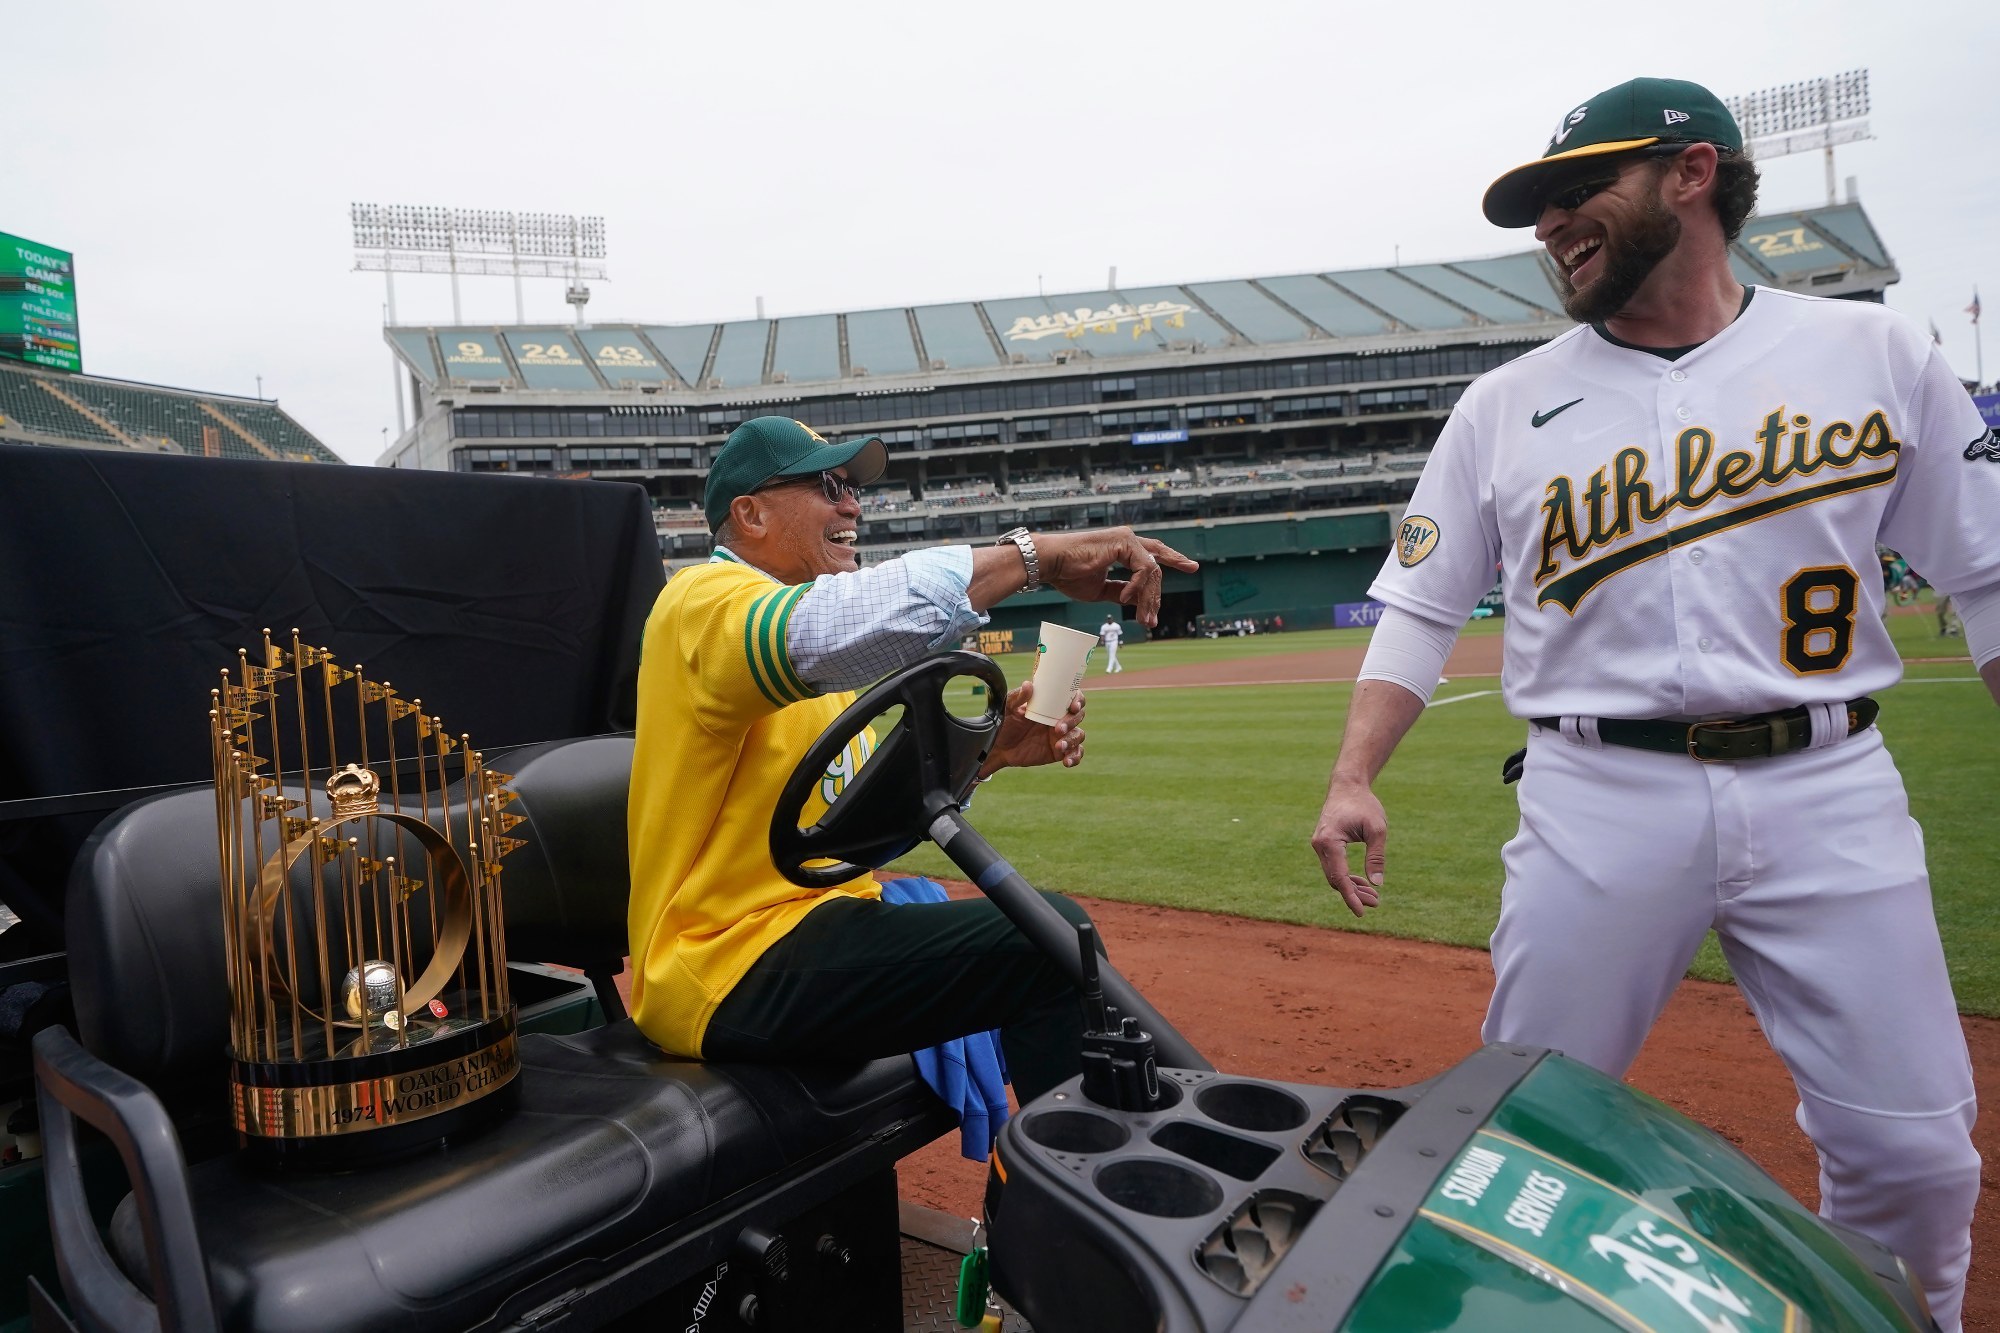 Reggie Jackson has gloomy outlook for A's future in Oakland